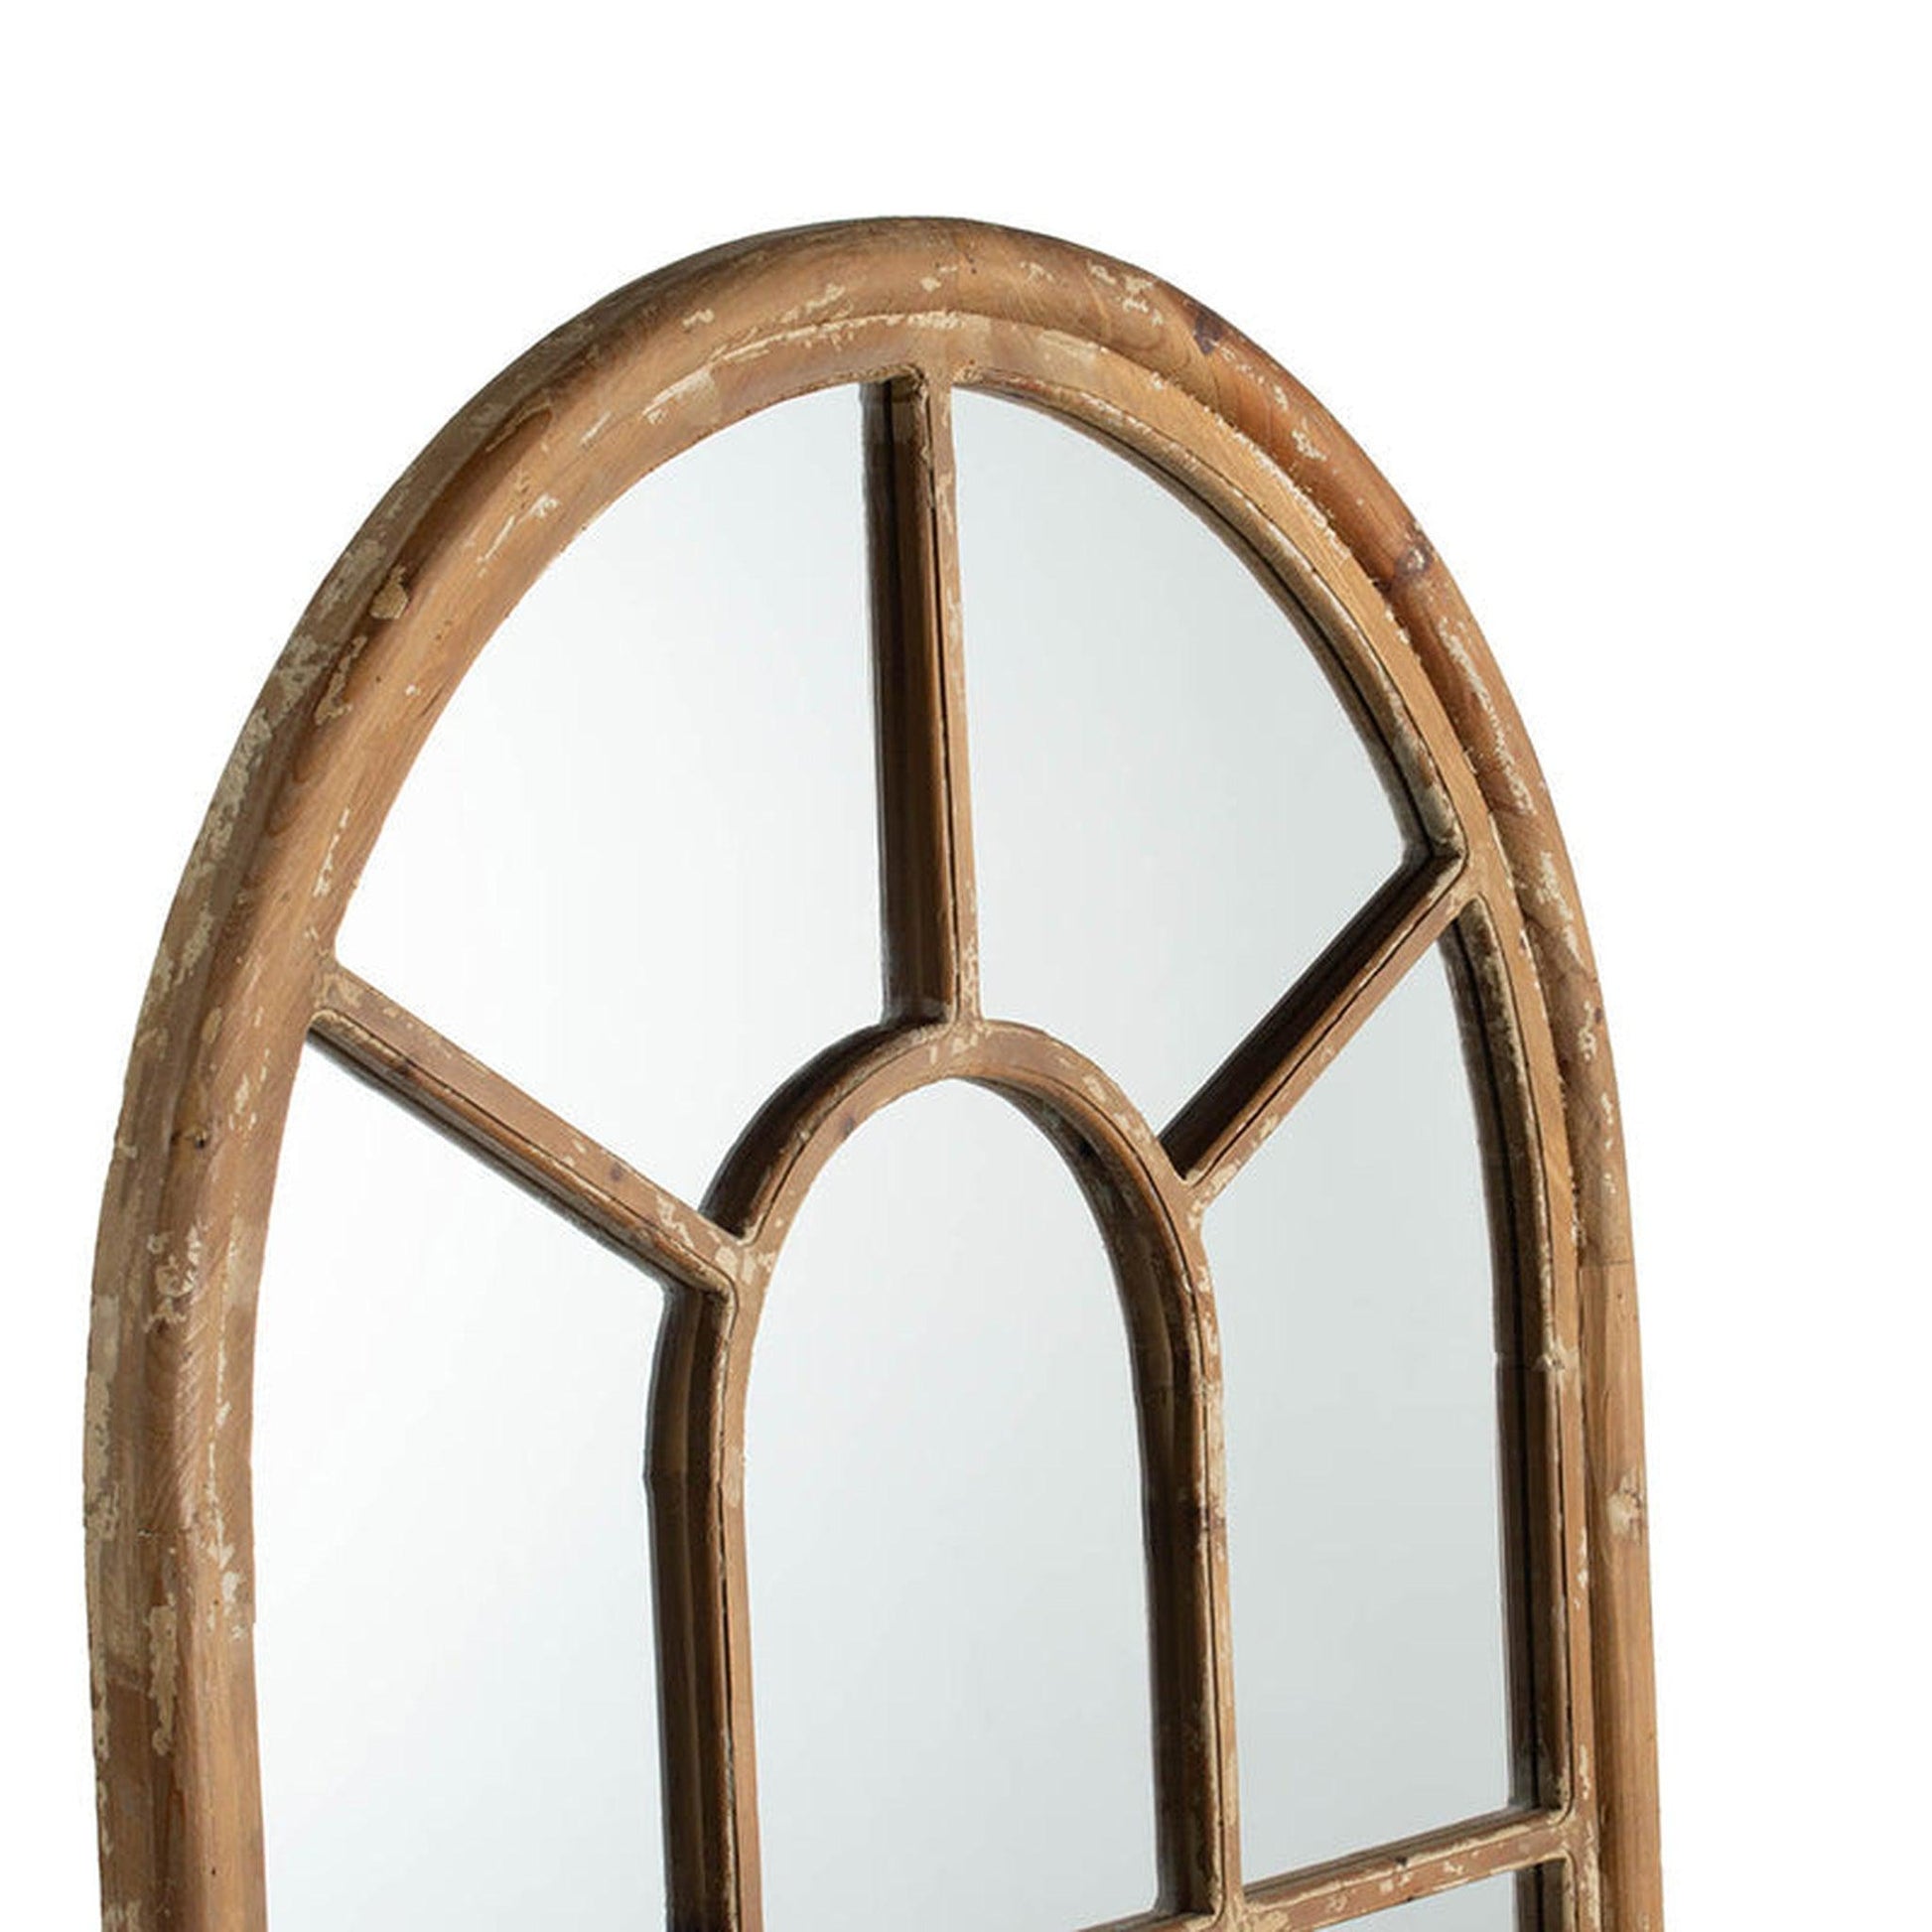 A&B Home Ada 24" x 74" Bundle of 5 Half-Round Elongated Distressed White Wash Wood Frame Wall-Mounted Mirror